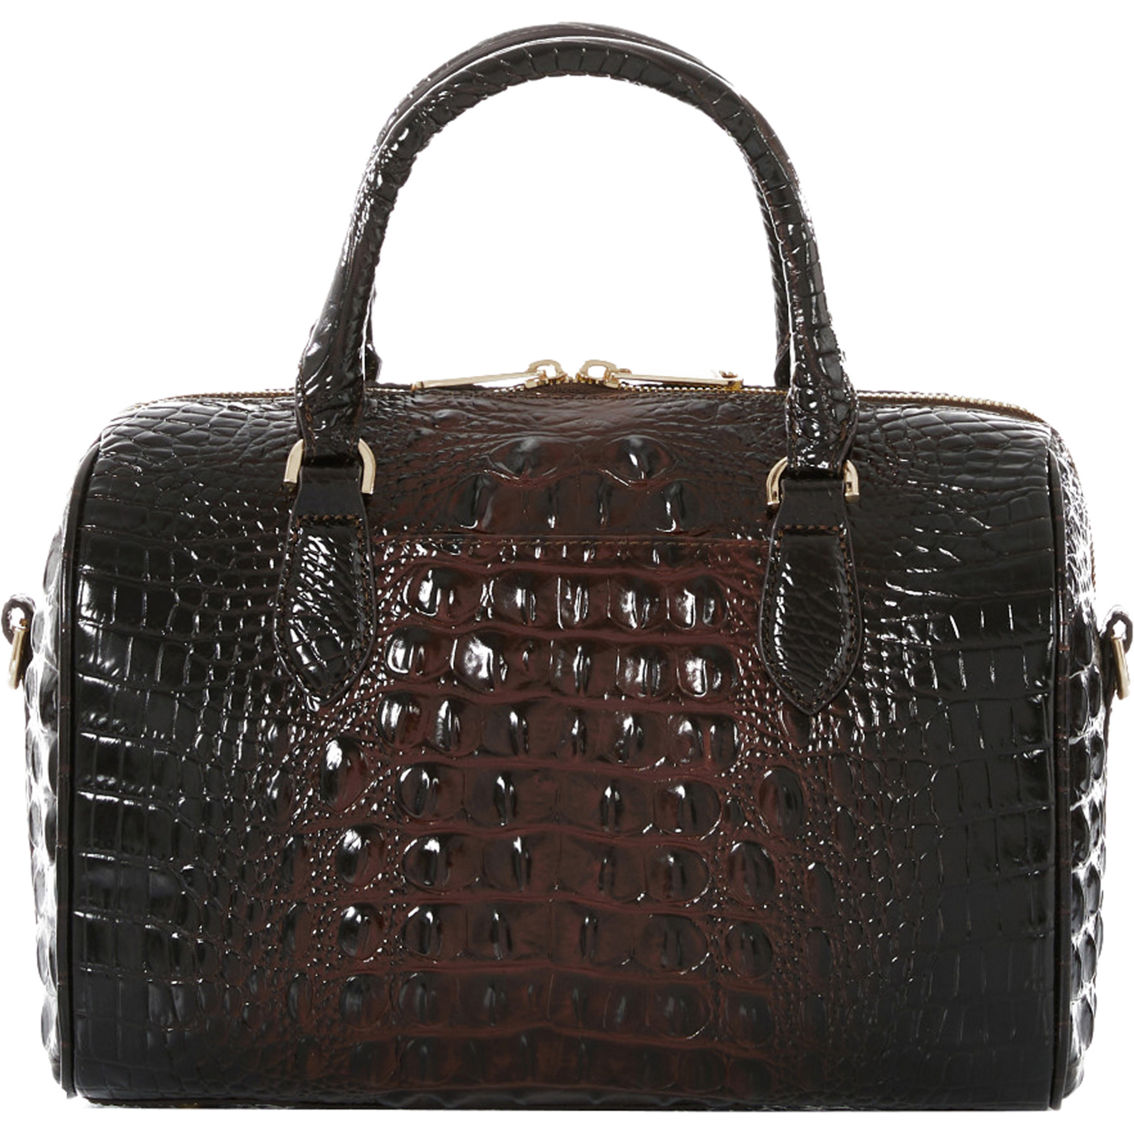 Brahmin Cocoa Ombre Melbourne Stacy Satchel - Image 2 of 4